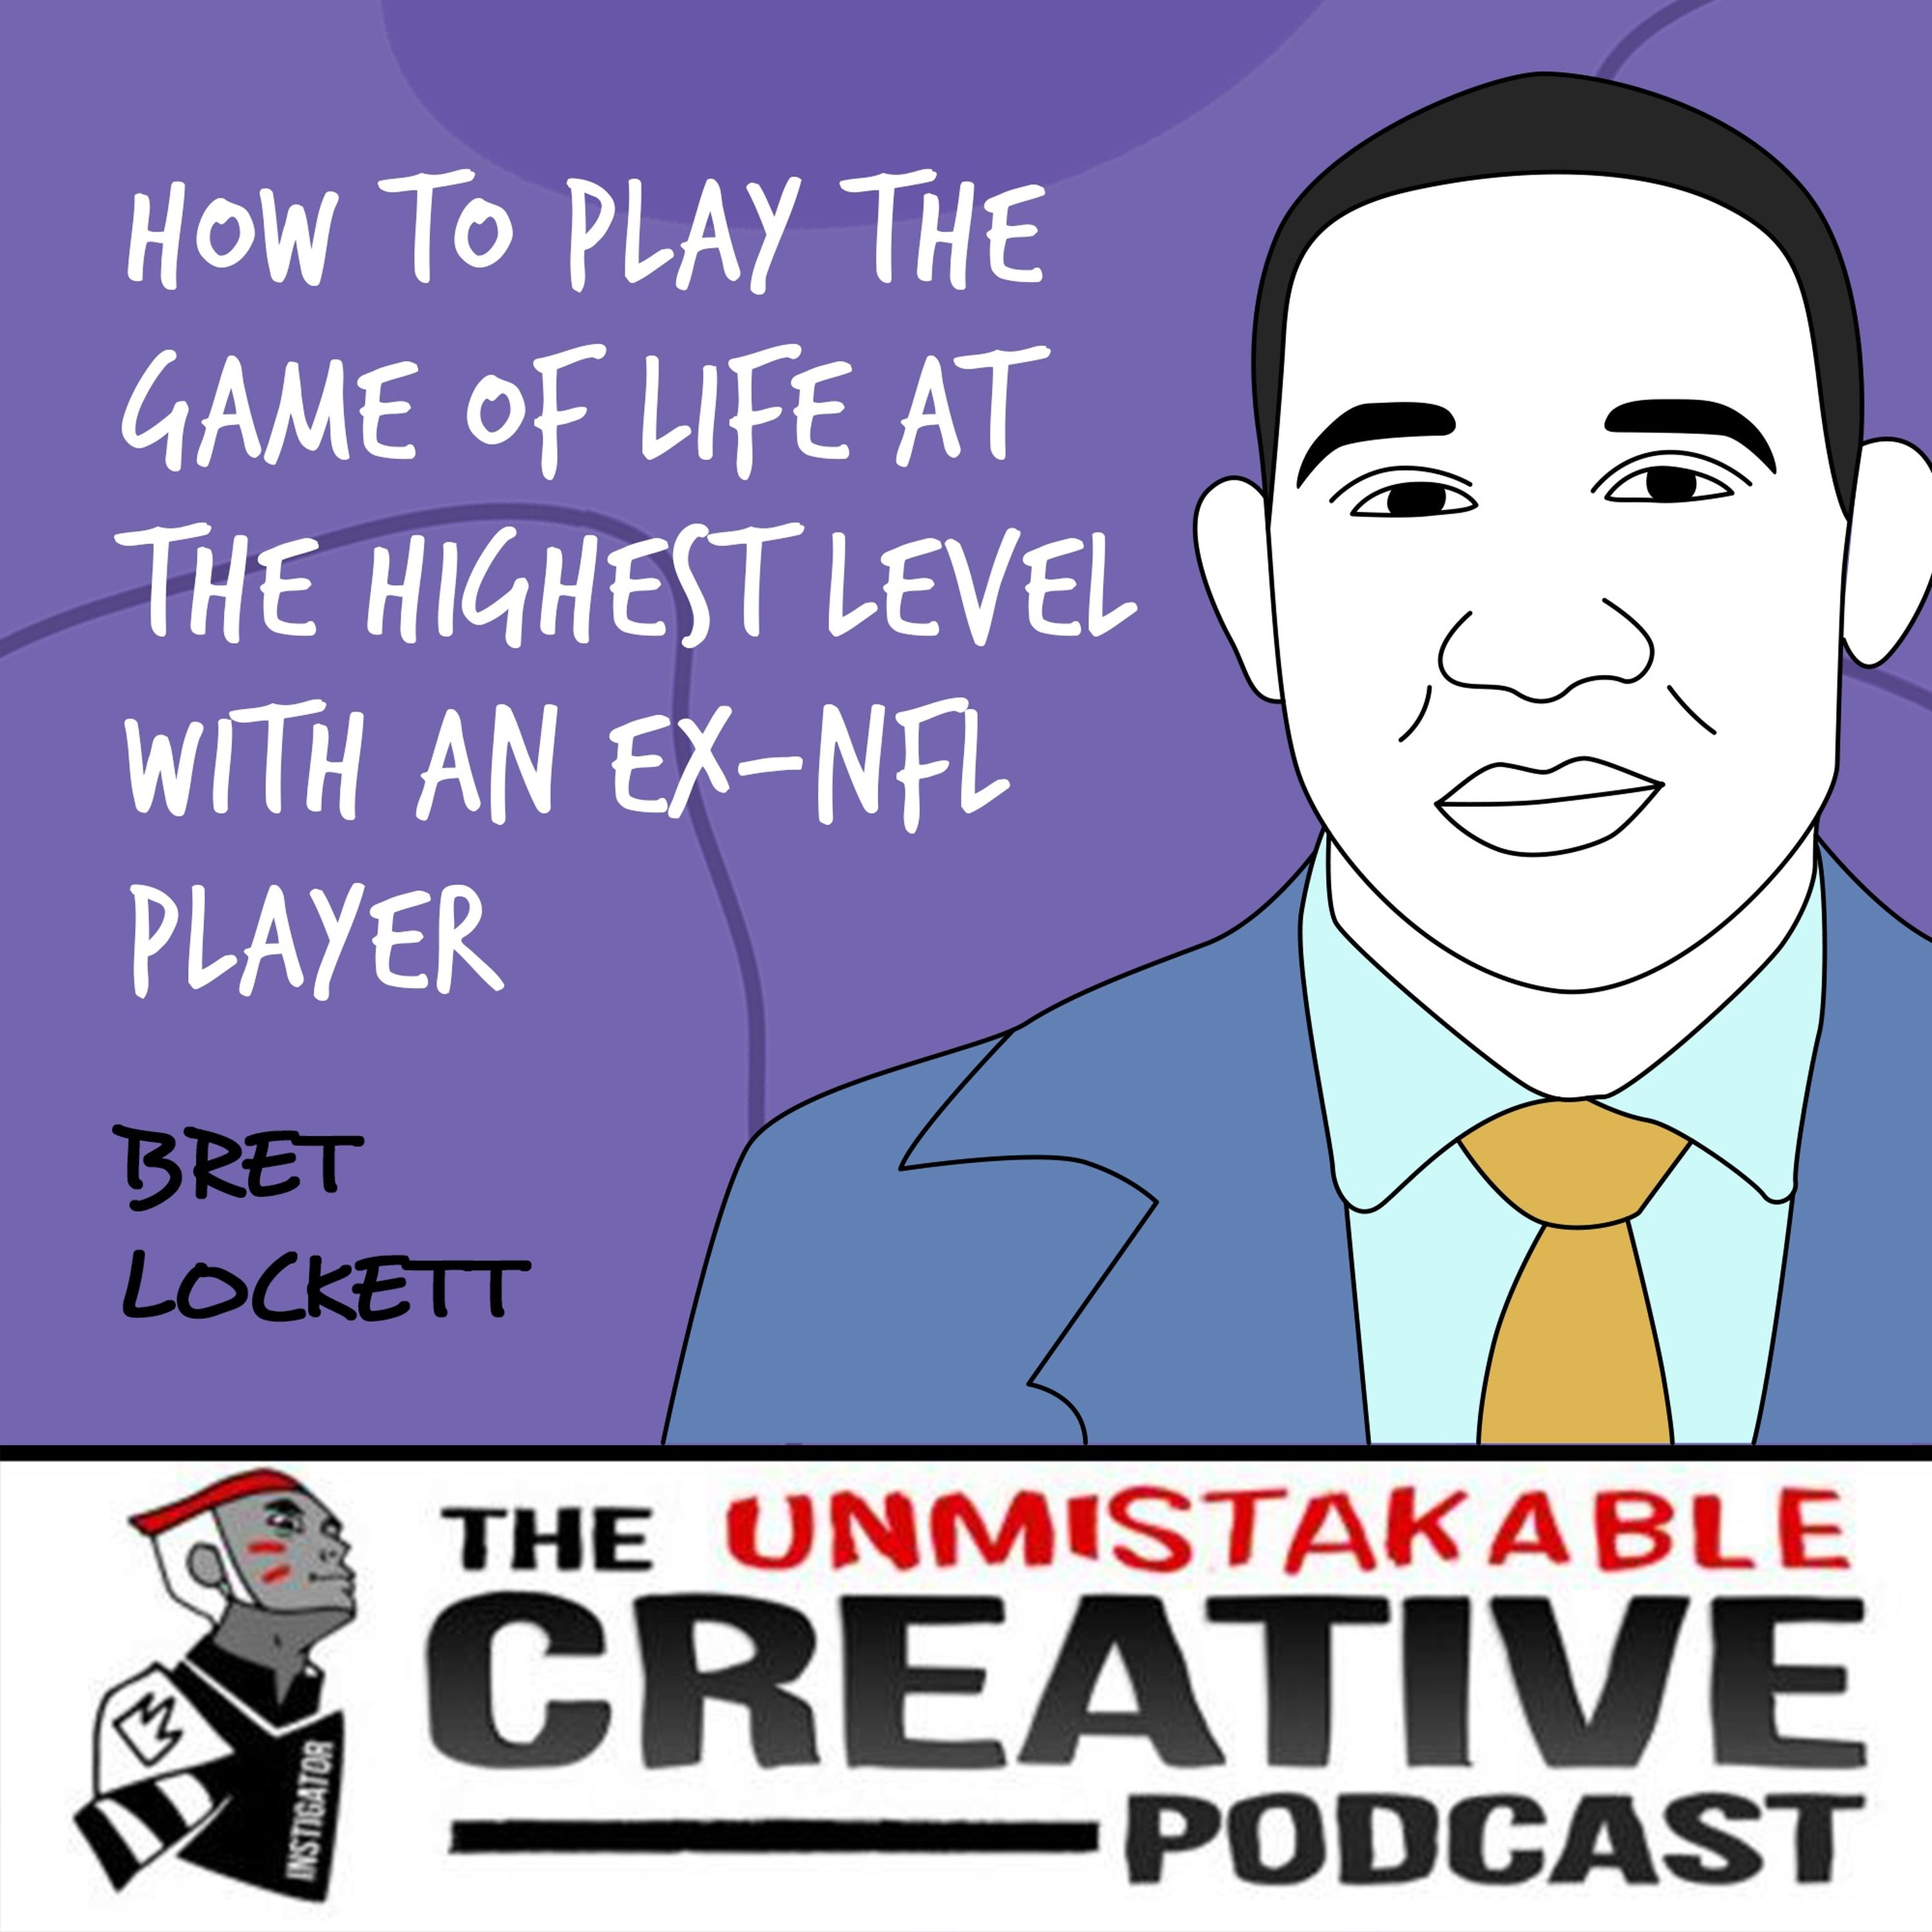 Bret Lockett | How to Play The Game of Life at The Highest Level with an Ex-NFL Player